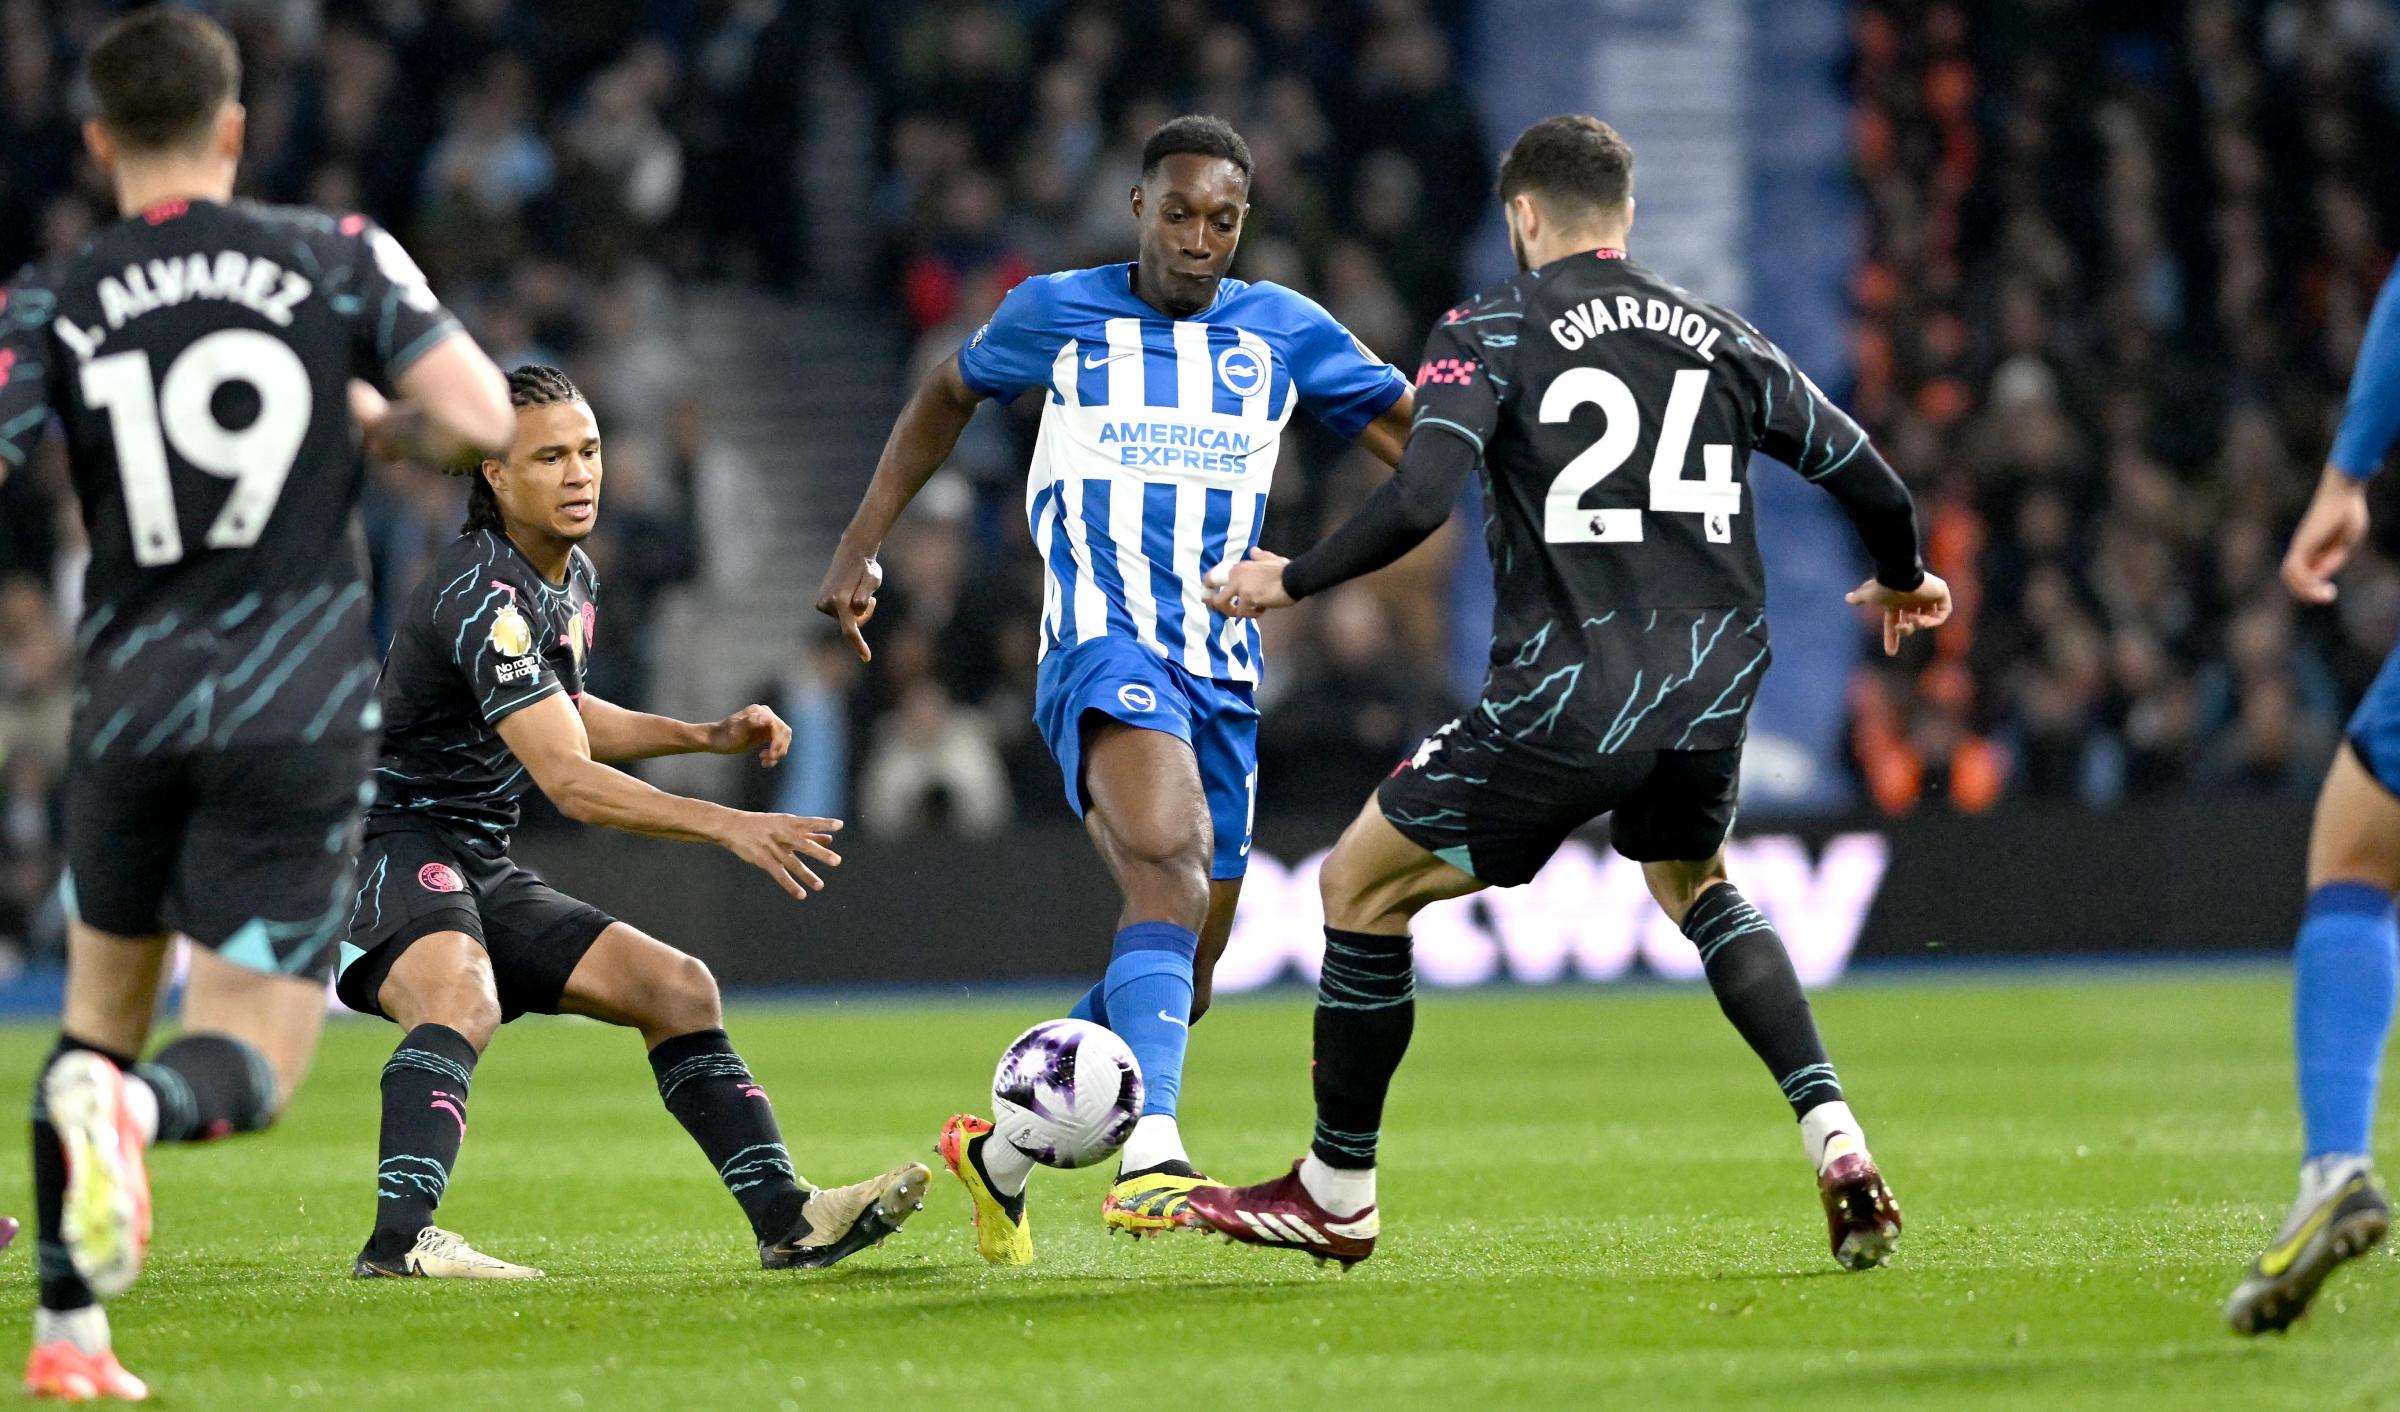 Brighton's Danny Welbeck told how his game has improved